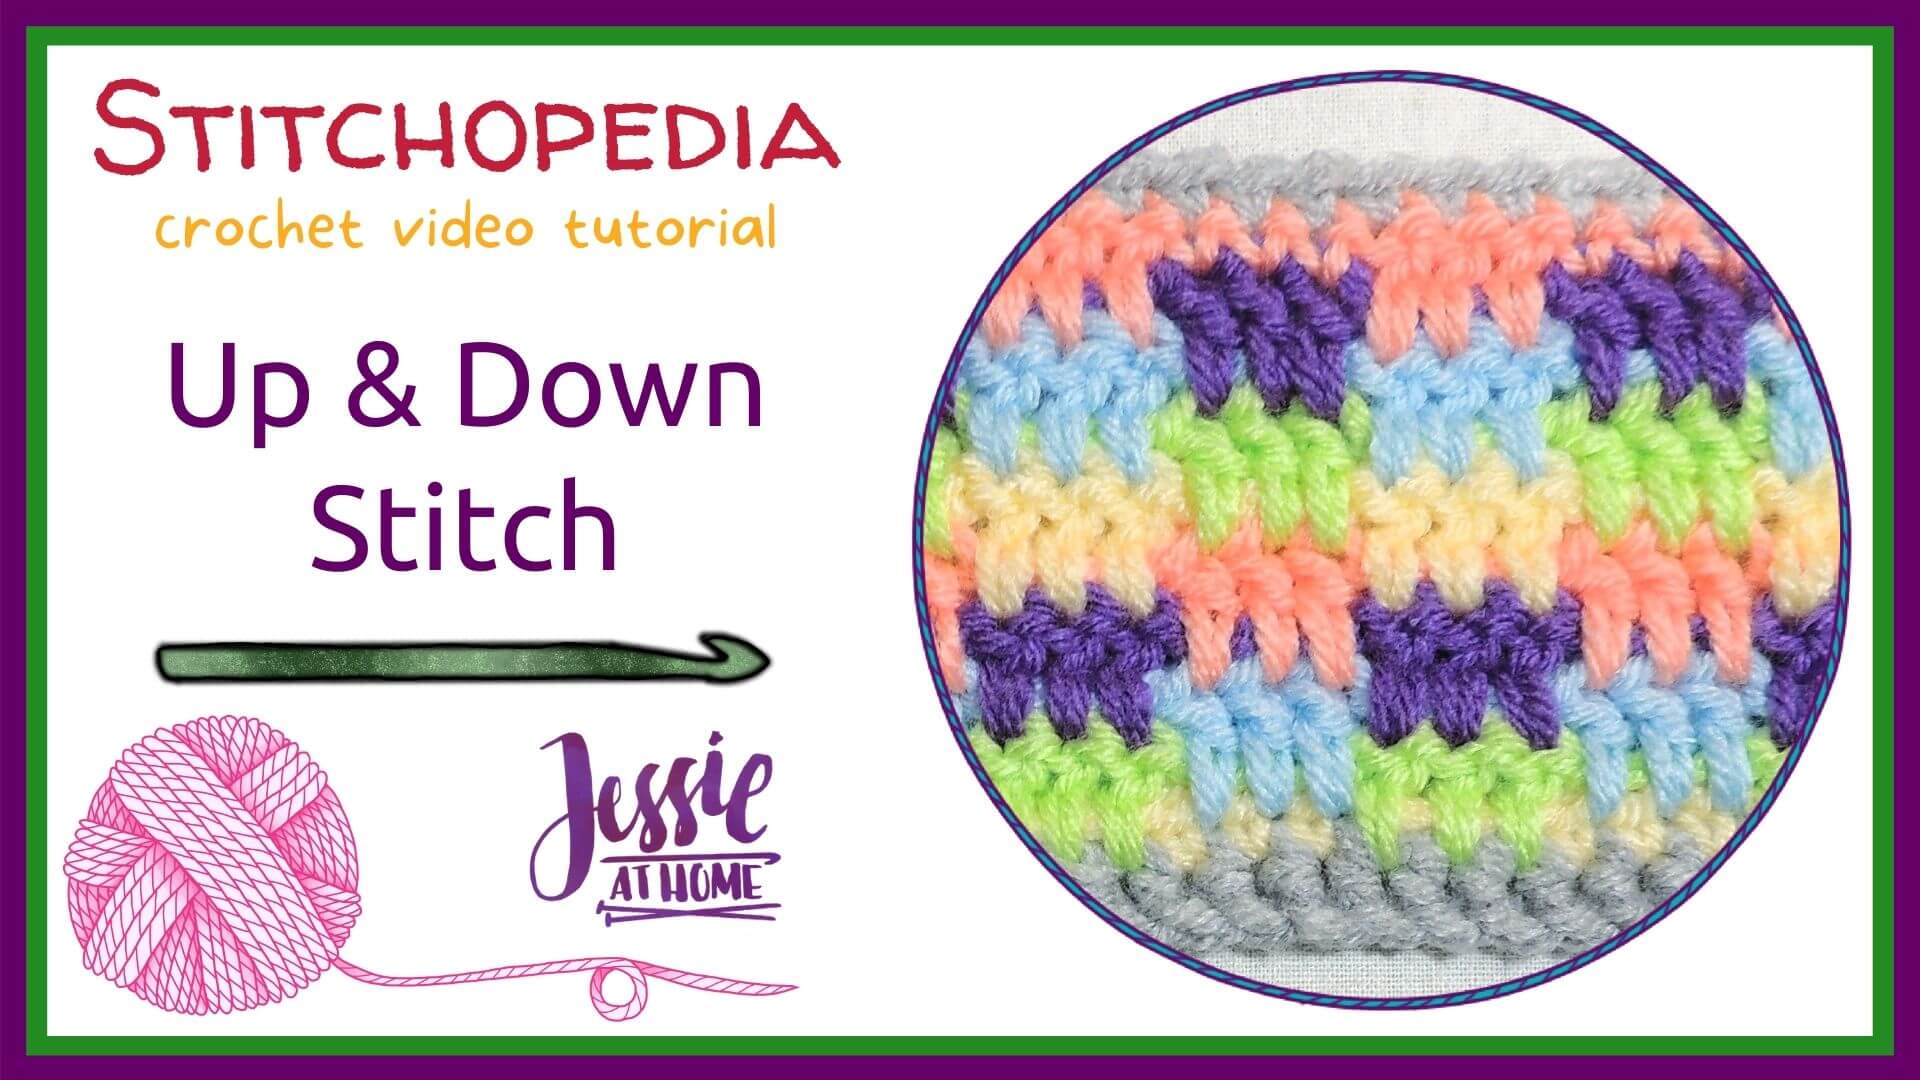 Up & Down Stitch - Stitchopedia Crochet Video Tutorial by Jessie At Home - Cover